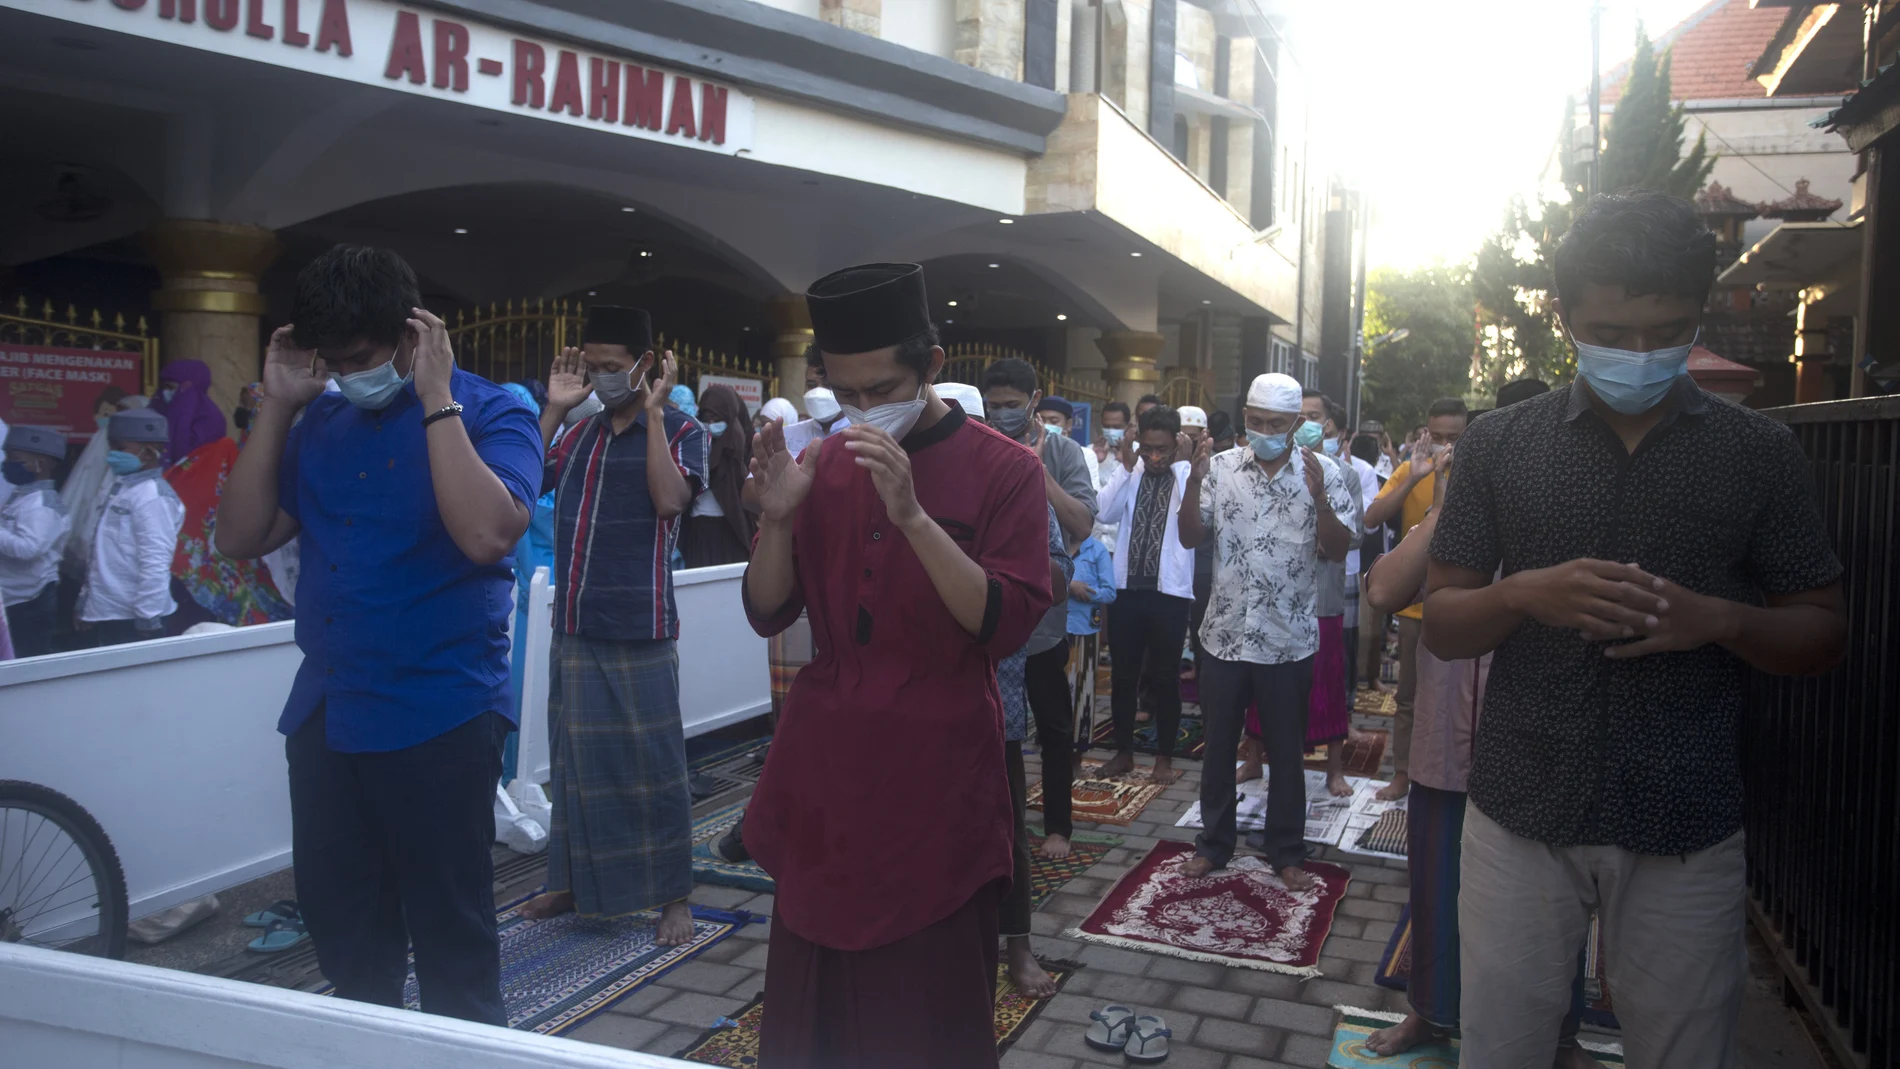 Muslims wearing face masks offer the Eid al-Fitr prayer in Bali, Indonesia Thursday, May 13, 2021. Indonesian Muslims perform Eid al-Fitr prayer that marks the end of the holy fasting month of Ramadan. (AP Photo/Firdia Lisnawati)